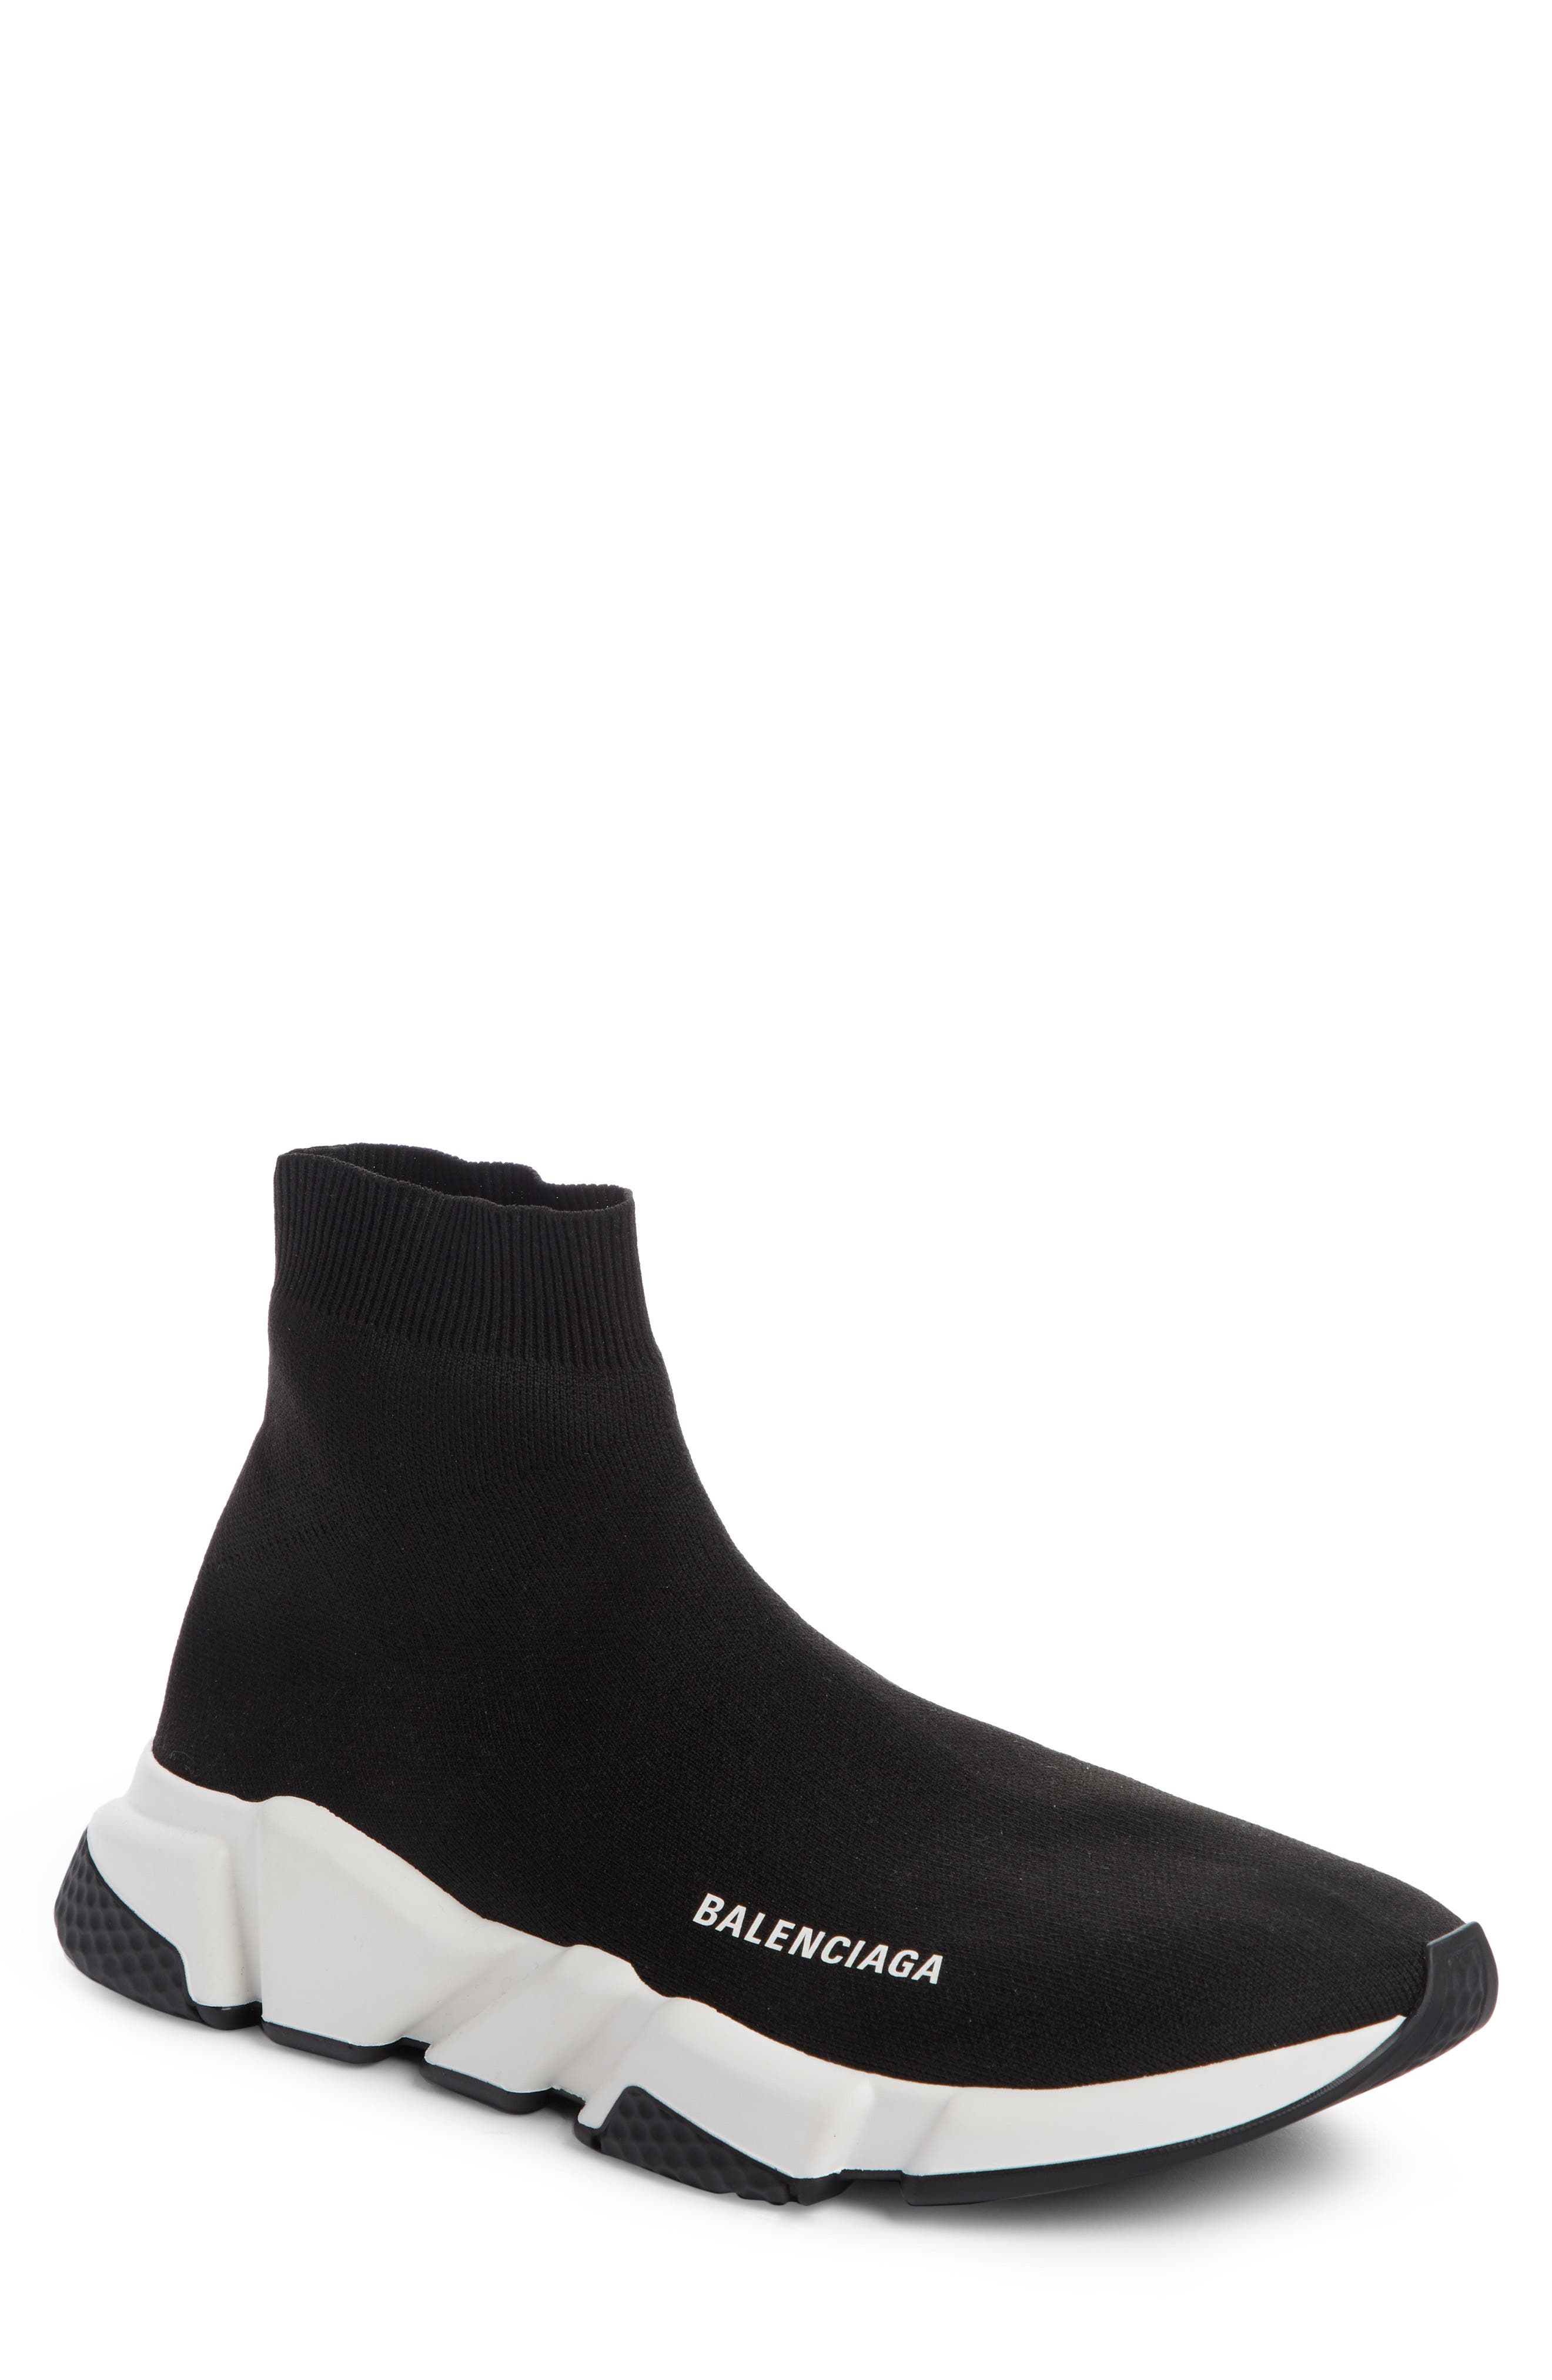 Buy > balenciaga speed trainer paillette > in stock